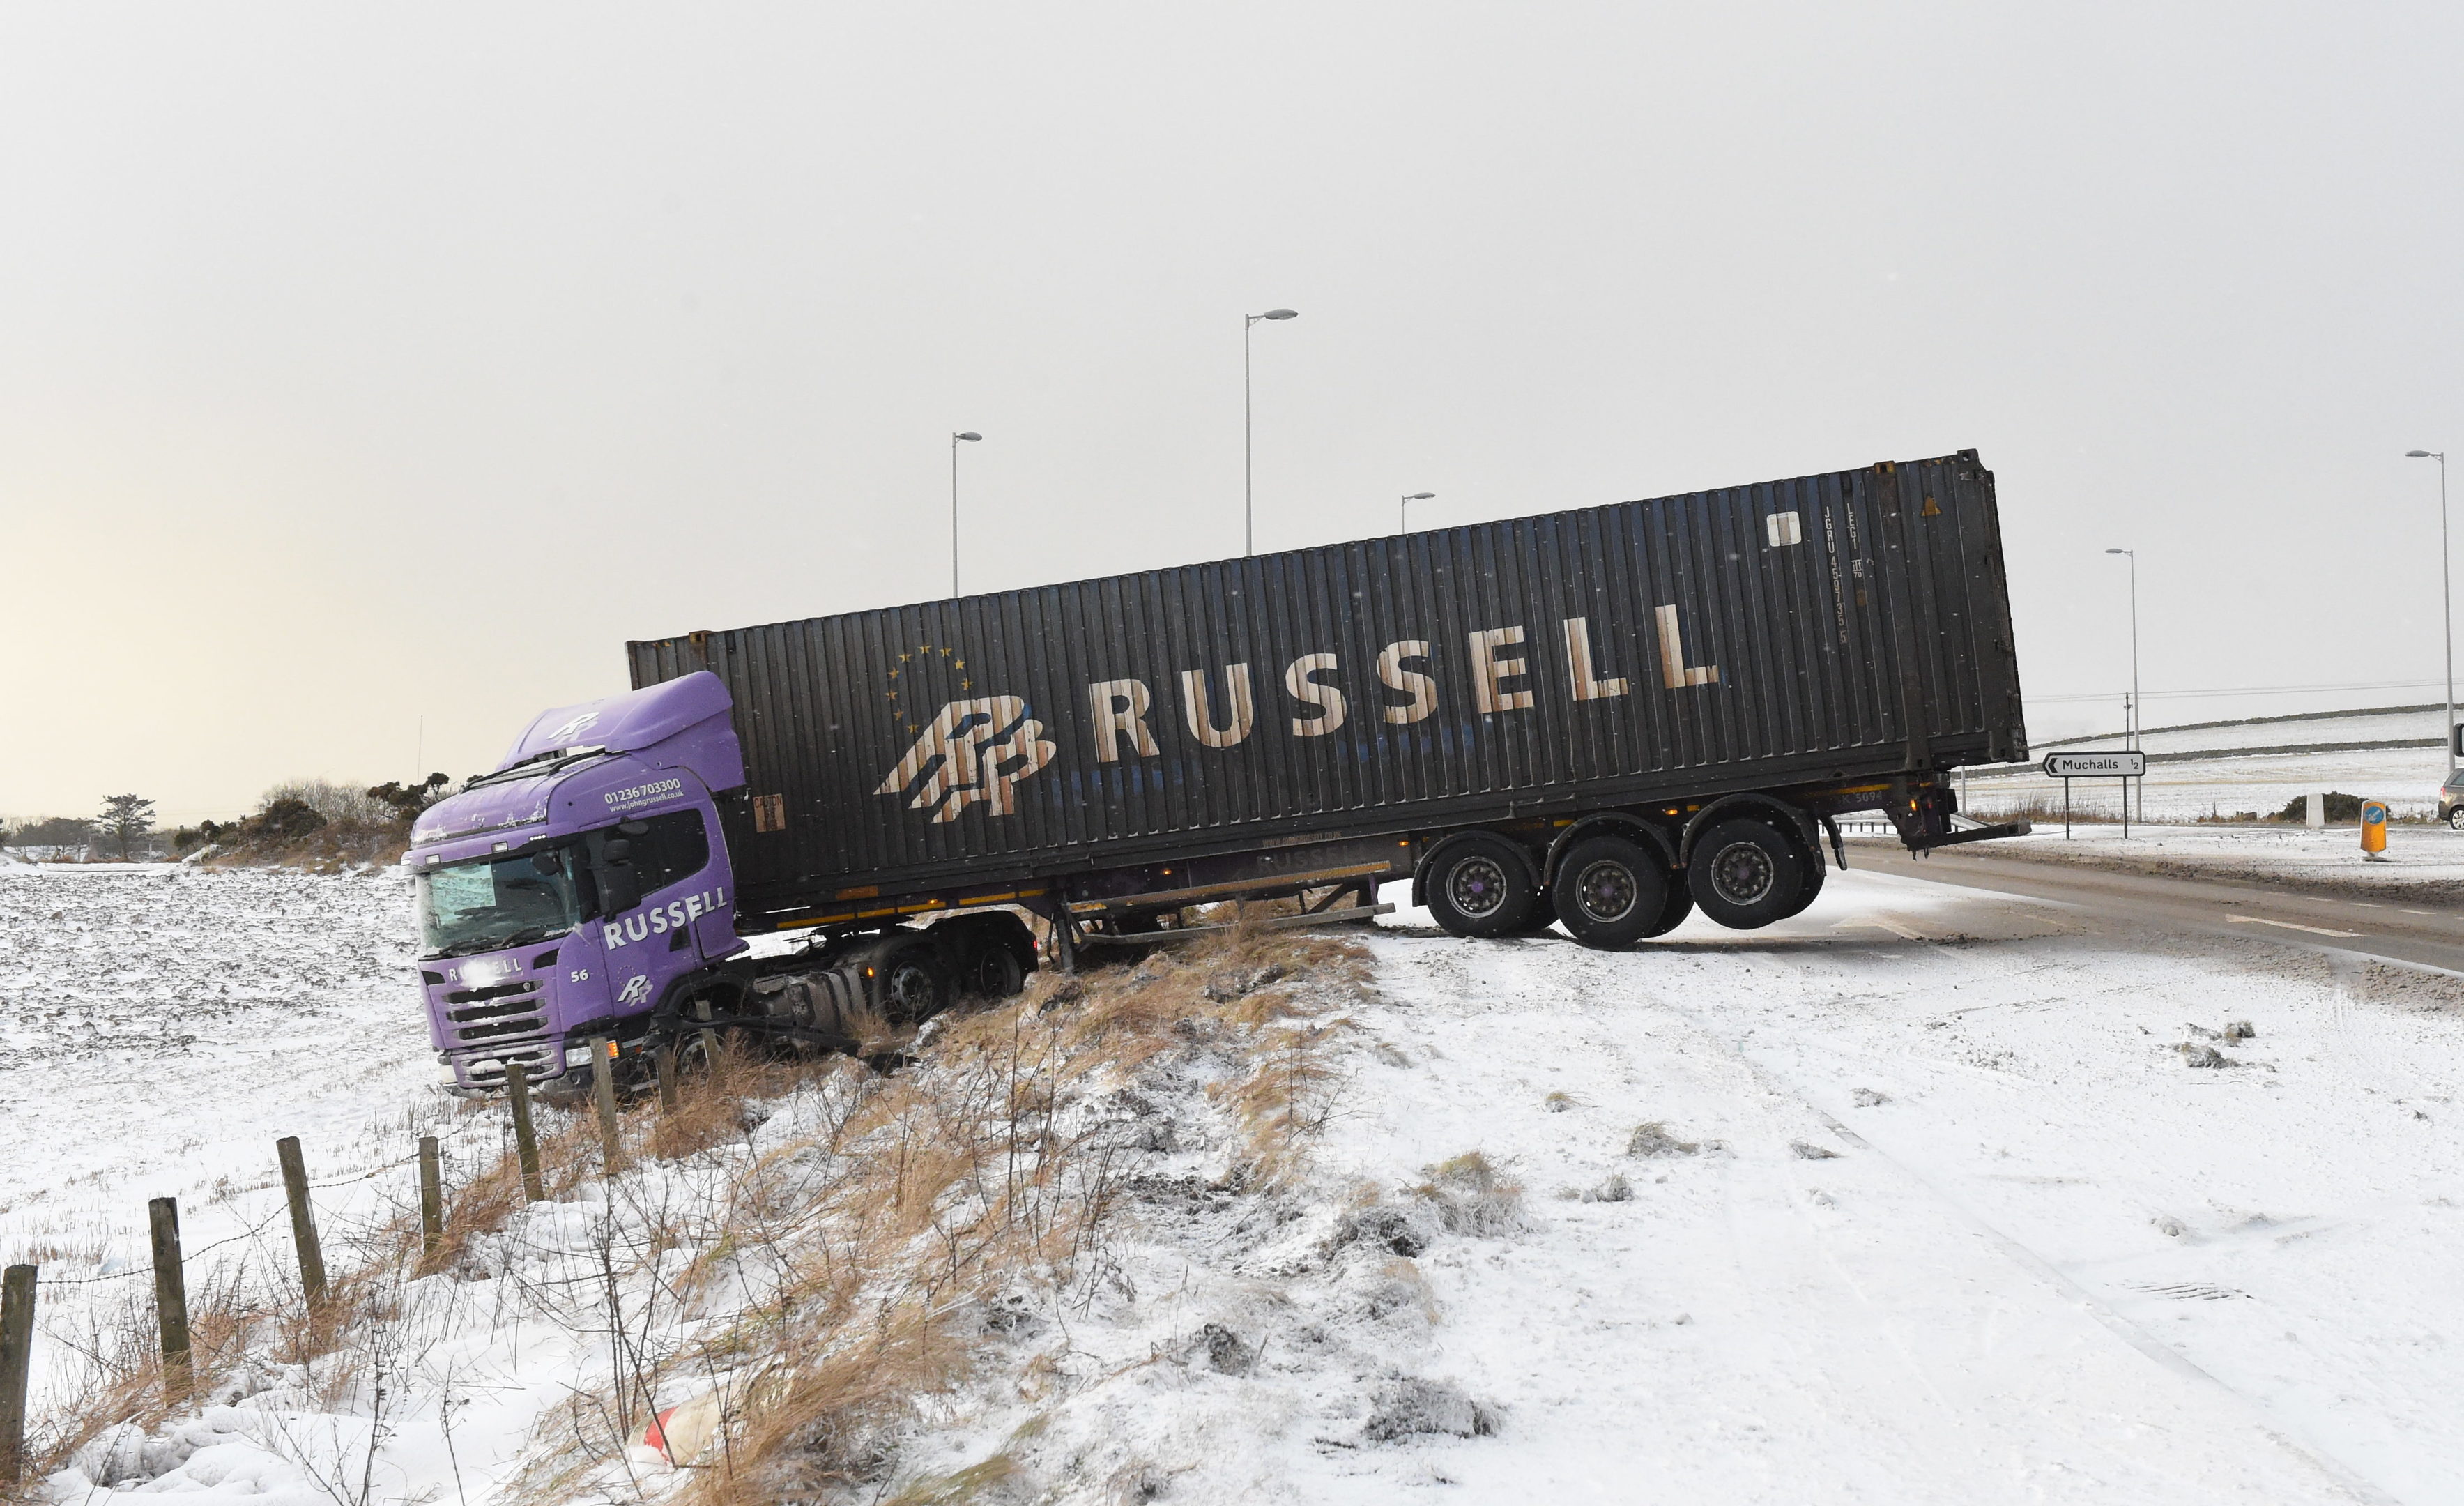 A lorry on the A90 has skidded off road and jackknifed due to the weather conditions.